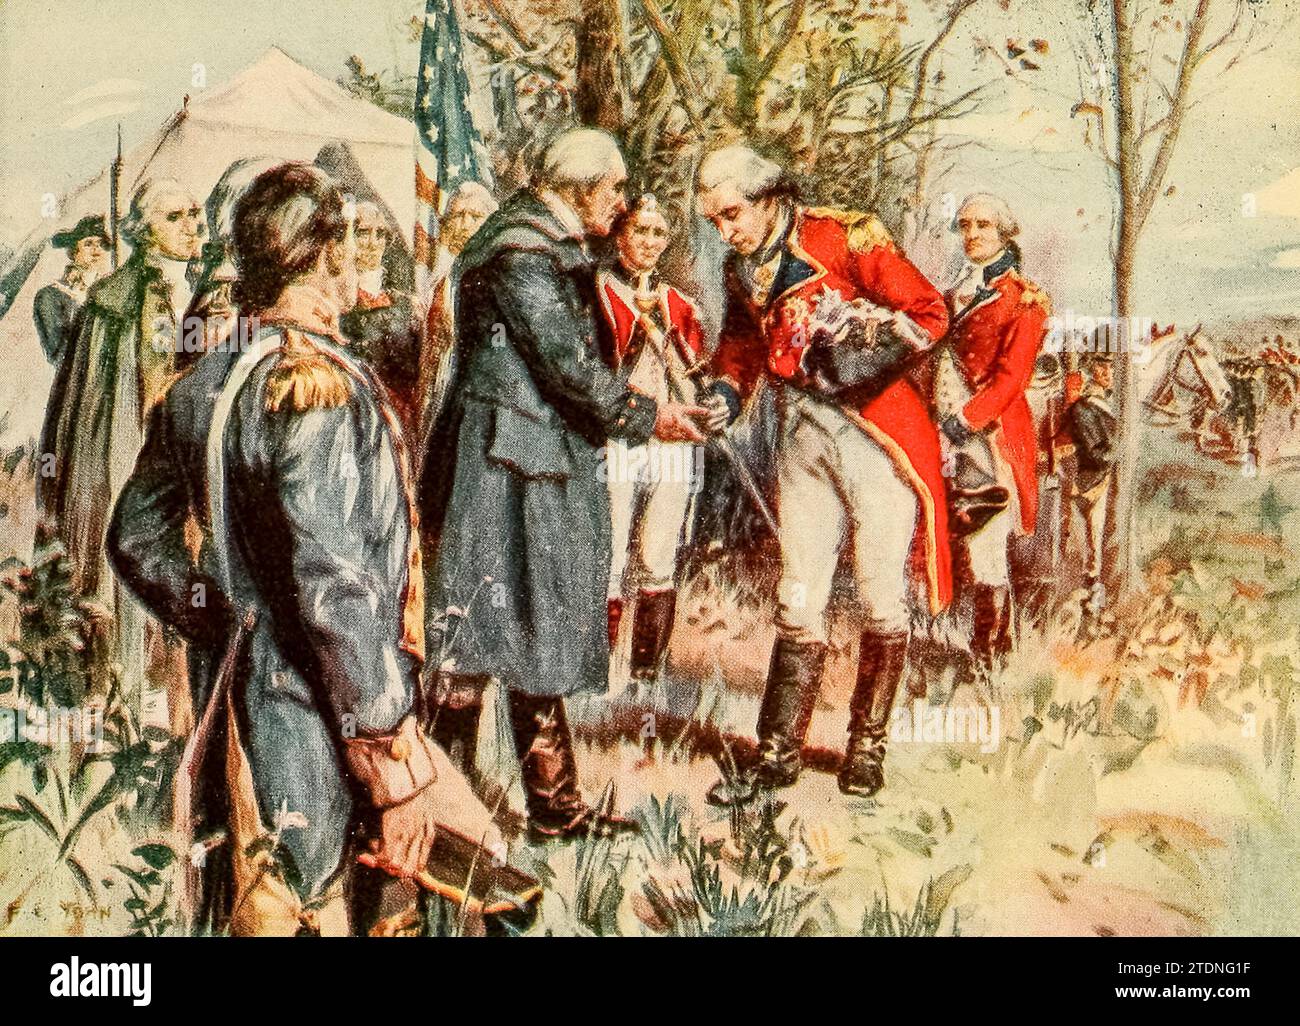 The Surrender of Burgoyne, after the Battle of Saratoga, October 17, 1777 From a Painting by F. C. Yohn. from the book A wonderland of the East, comprising the lake and mountain region of New England and eastern New York; a book for those who love to wander among beautiful lakes and rivers, valleys and mountains, or in places made famous by historic men and events; to which is added an afterword on the worth-while in this wonderland of the East, with some suggestions to motor-tourists on how best to find it by Kitchin, William Copeman. Publication date 1920 Publisher: The Page company Stock Photo